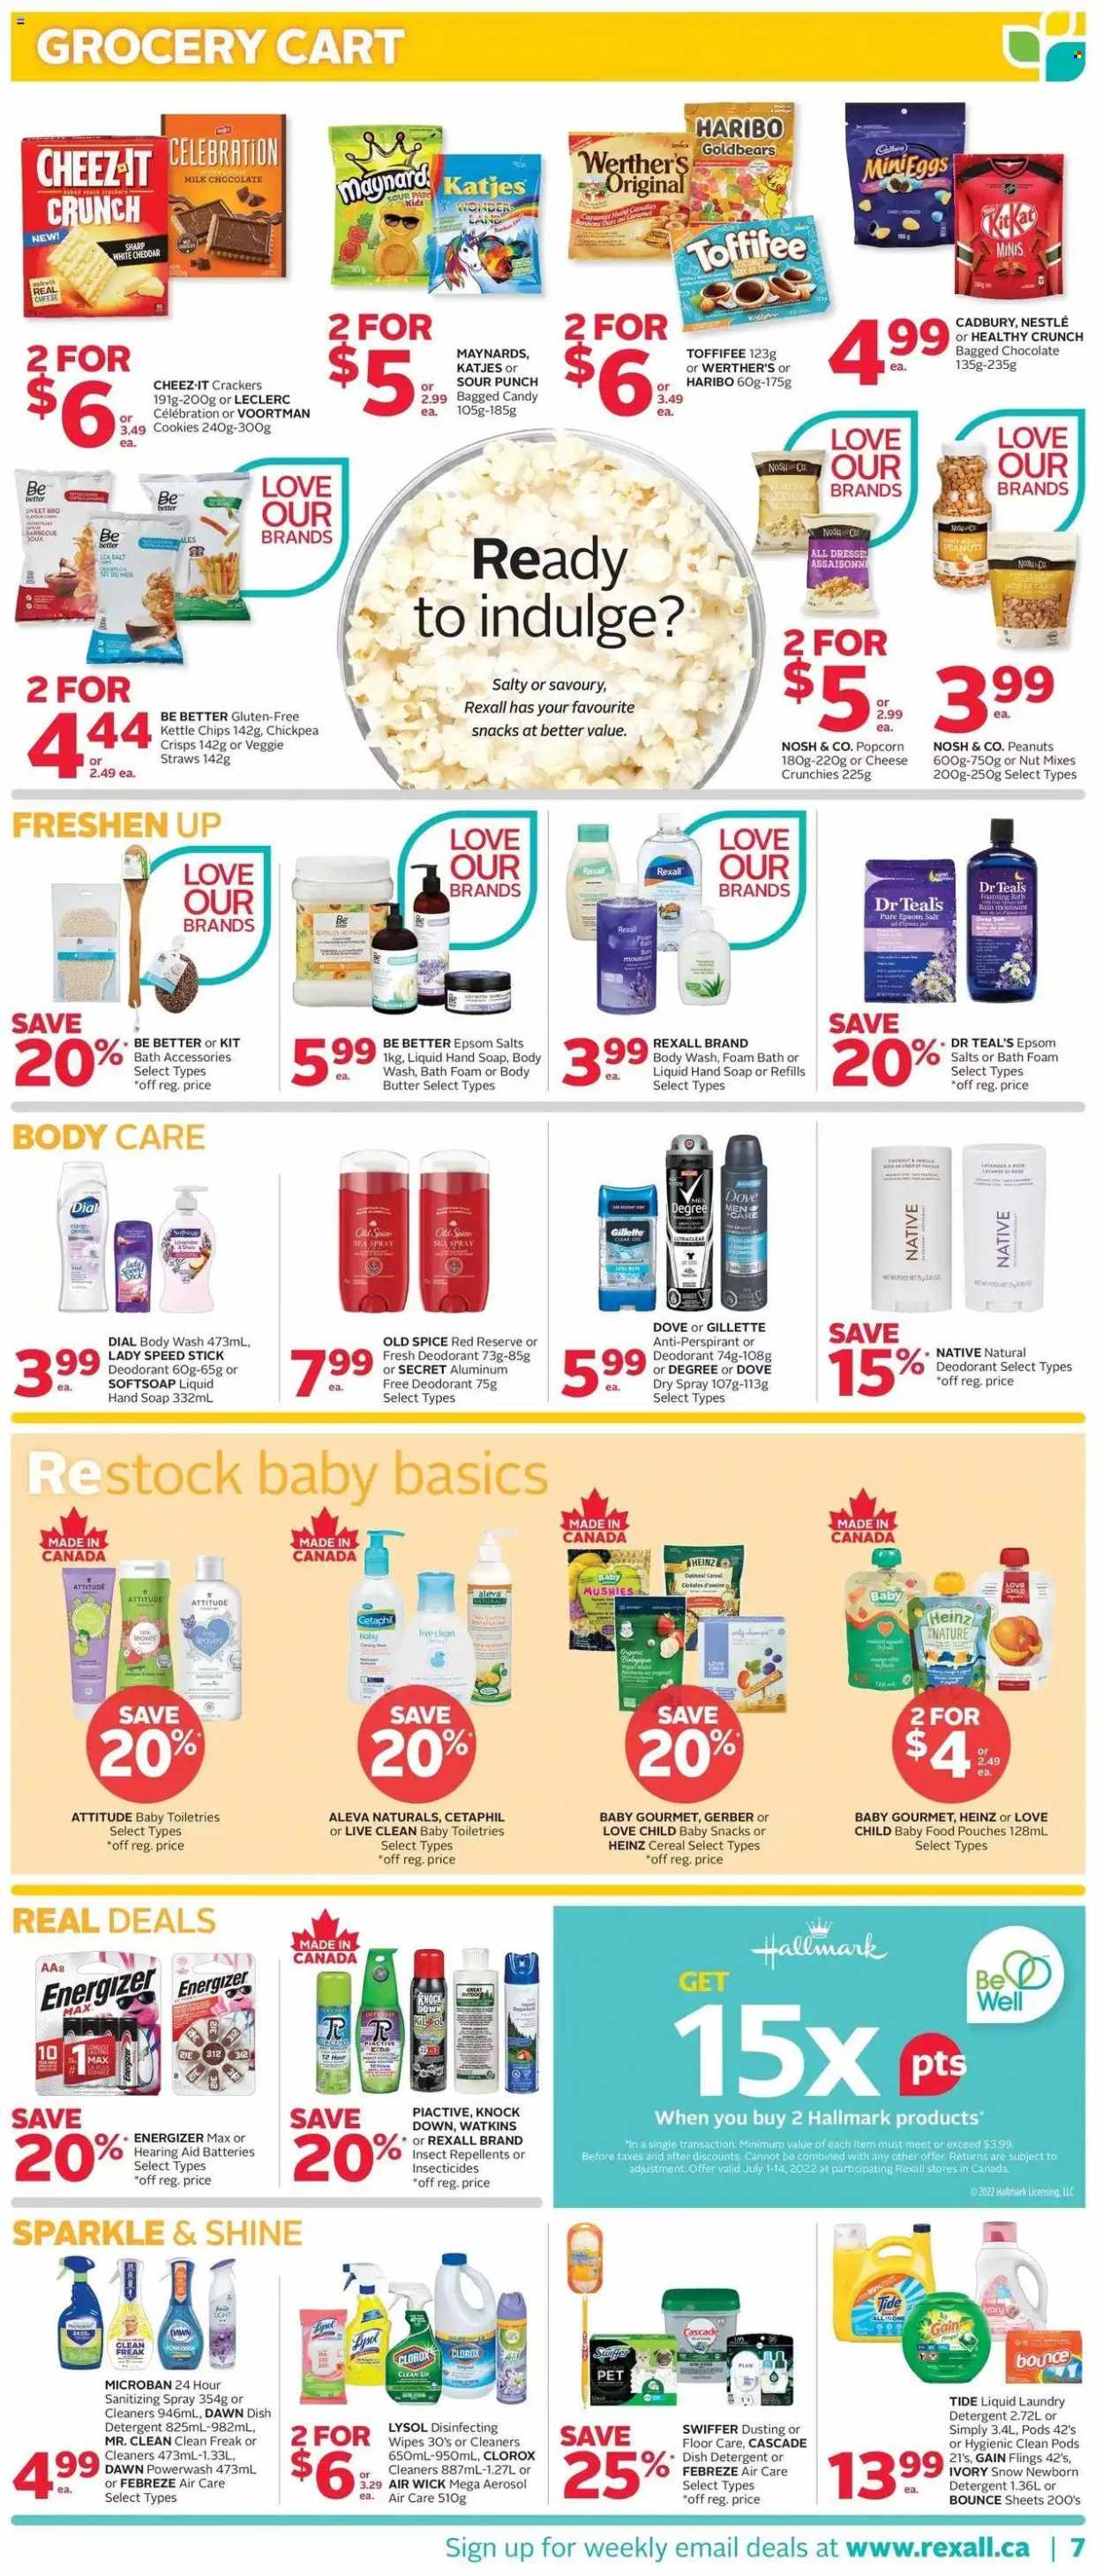 thumbnail - Rexall Flyer - July 01, 2022 - July 07, 2022 - Sales products - cookies, milk chocolate, chocolate, Haribo, crackers, Cadbury, Gerber, chips, popcorn, Veggie Straws, Cheez-It, oatmeal, cereals, spice, caramel, peanuts, wine, rosé wine, wipes, Febreze, Gain, Lysol, Clorox, Swiffer, Tide, laundry detergent, Bounce, Cascade, body wash, Softsoap, hand soap, bath foam, Dial, soap, Gillette, body butter, anti-perspirant, Speed Stick, hook, Sharp, Air Wick, battery, detergent, Dove, Energizer, Nestlé, Heinz, Old Spice, deodorant. Page 7.